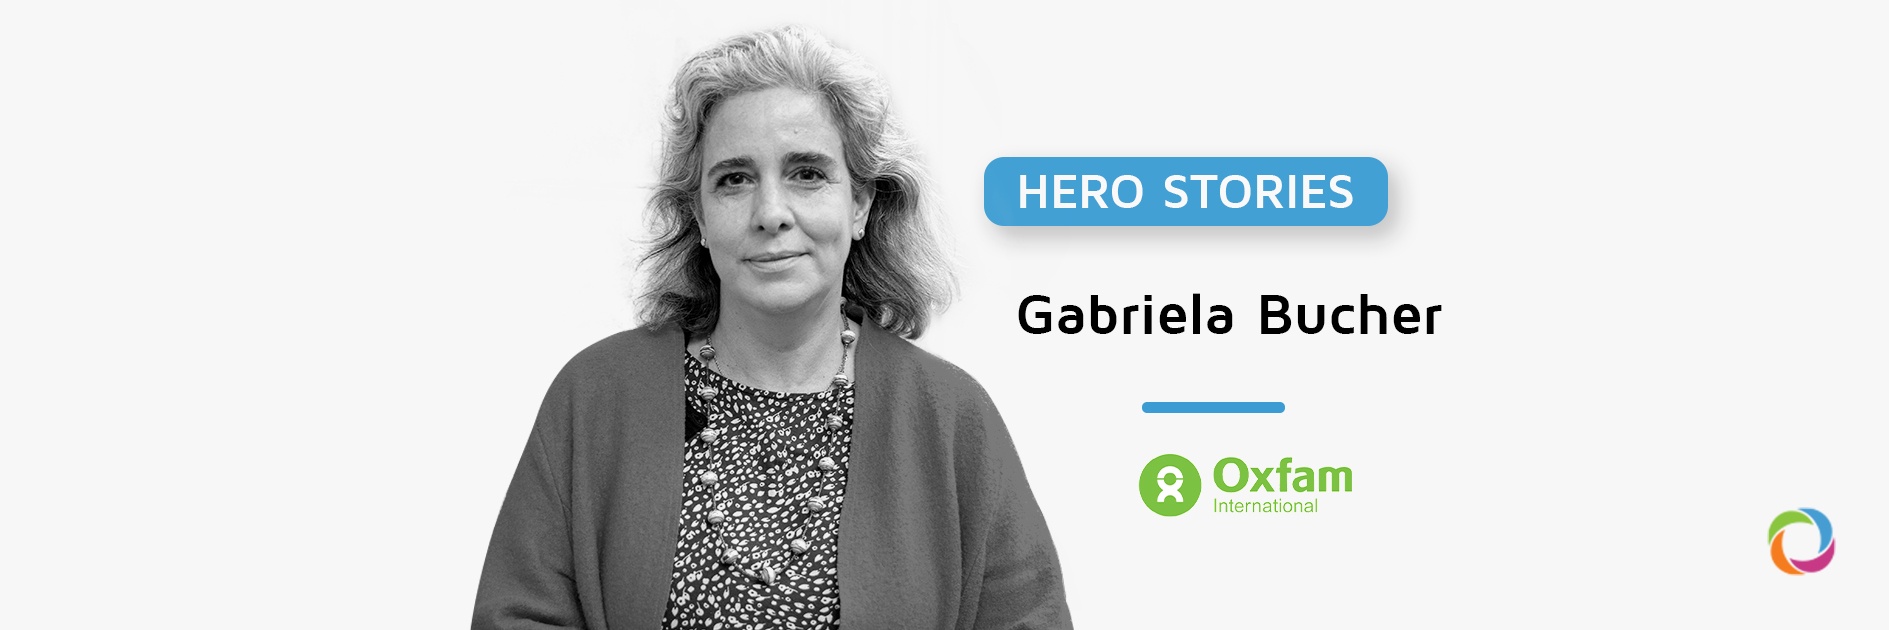 Hero Stories | Gabriela Bucher: “GDP growth doesn’t mean anything if it doesn’t revert into people’s wellbeing”